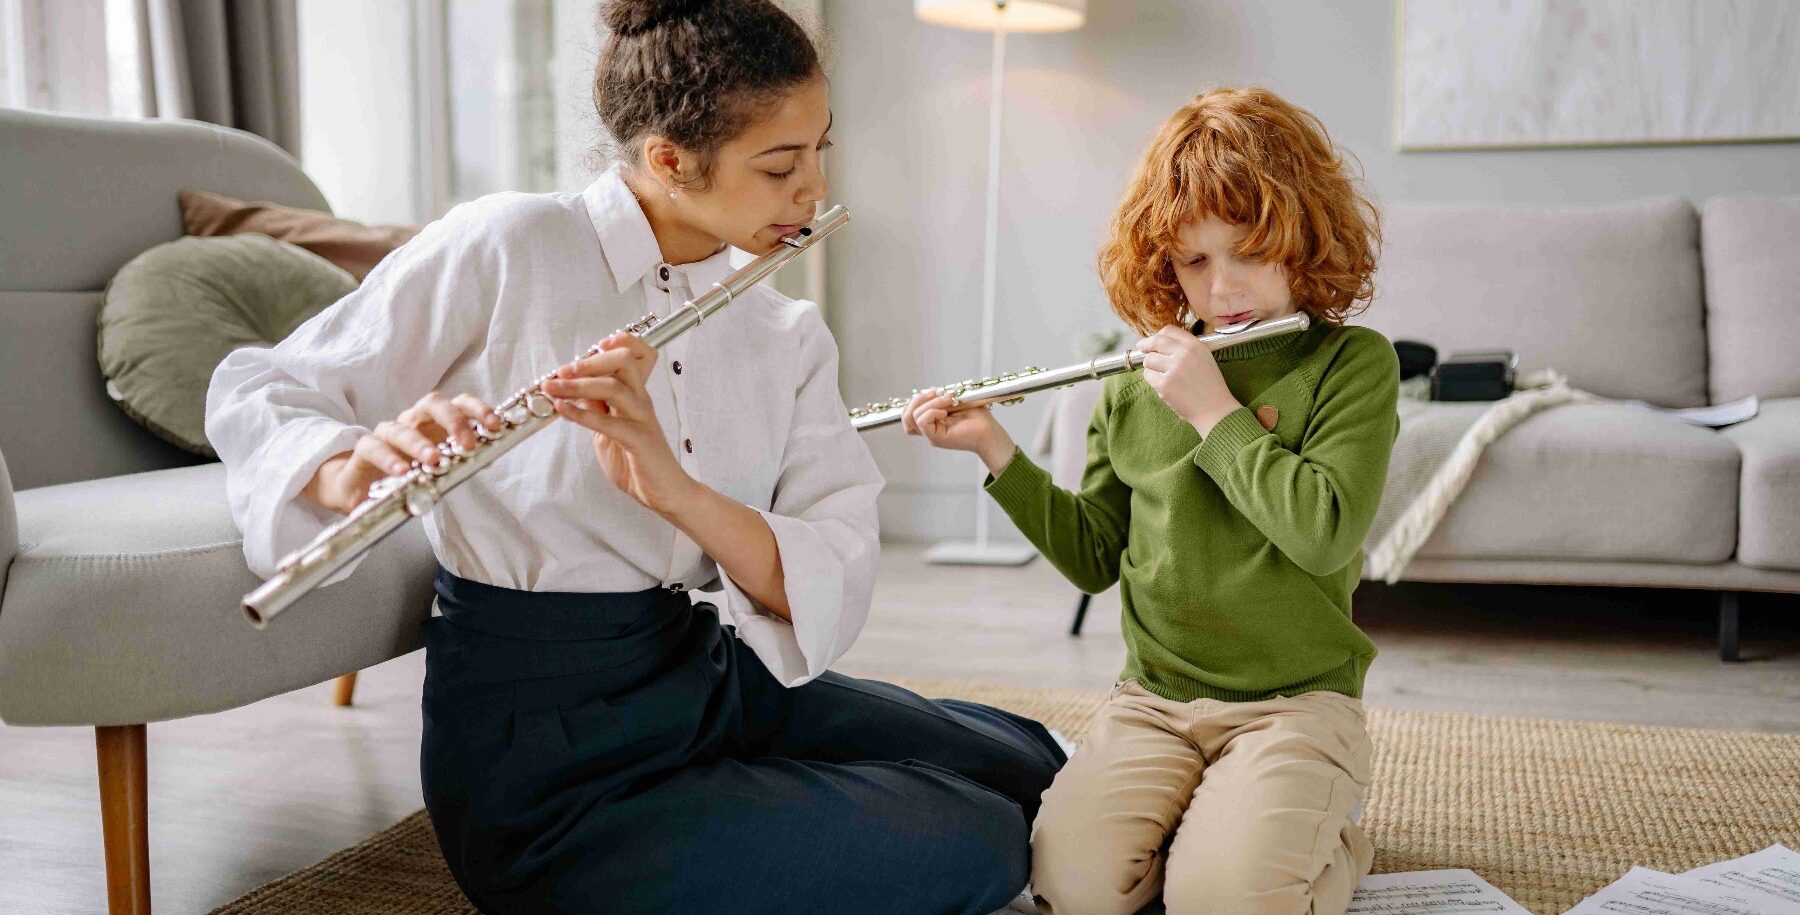 School student playing musical instruments - Managing Stress in High School Students